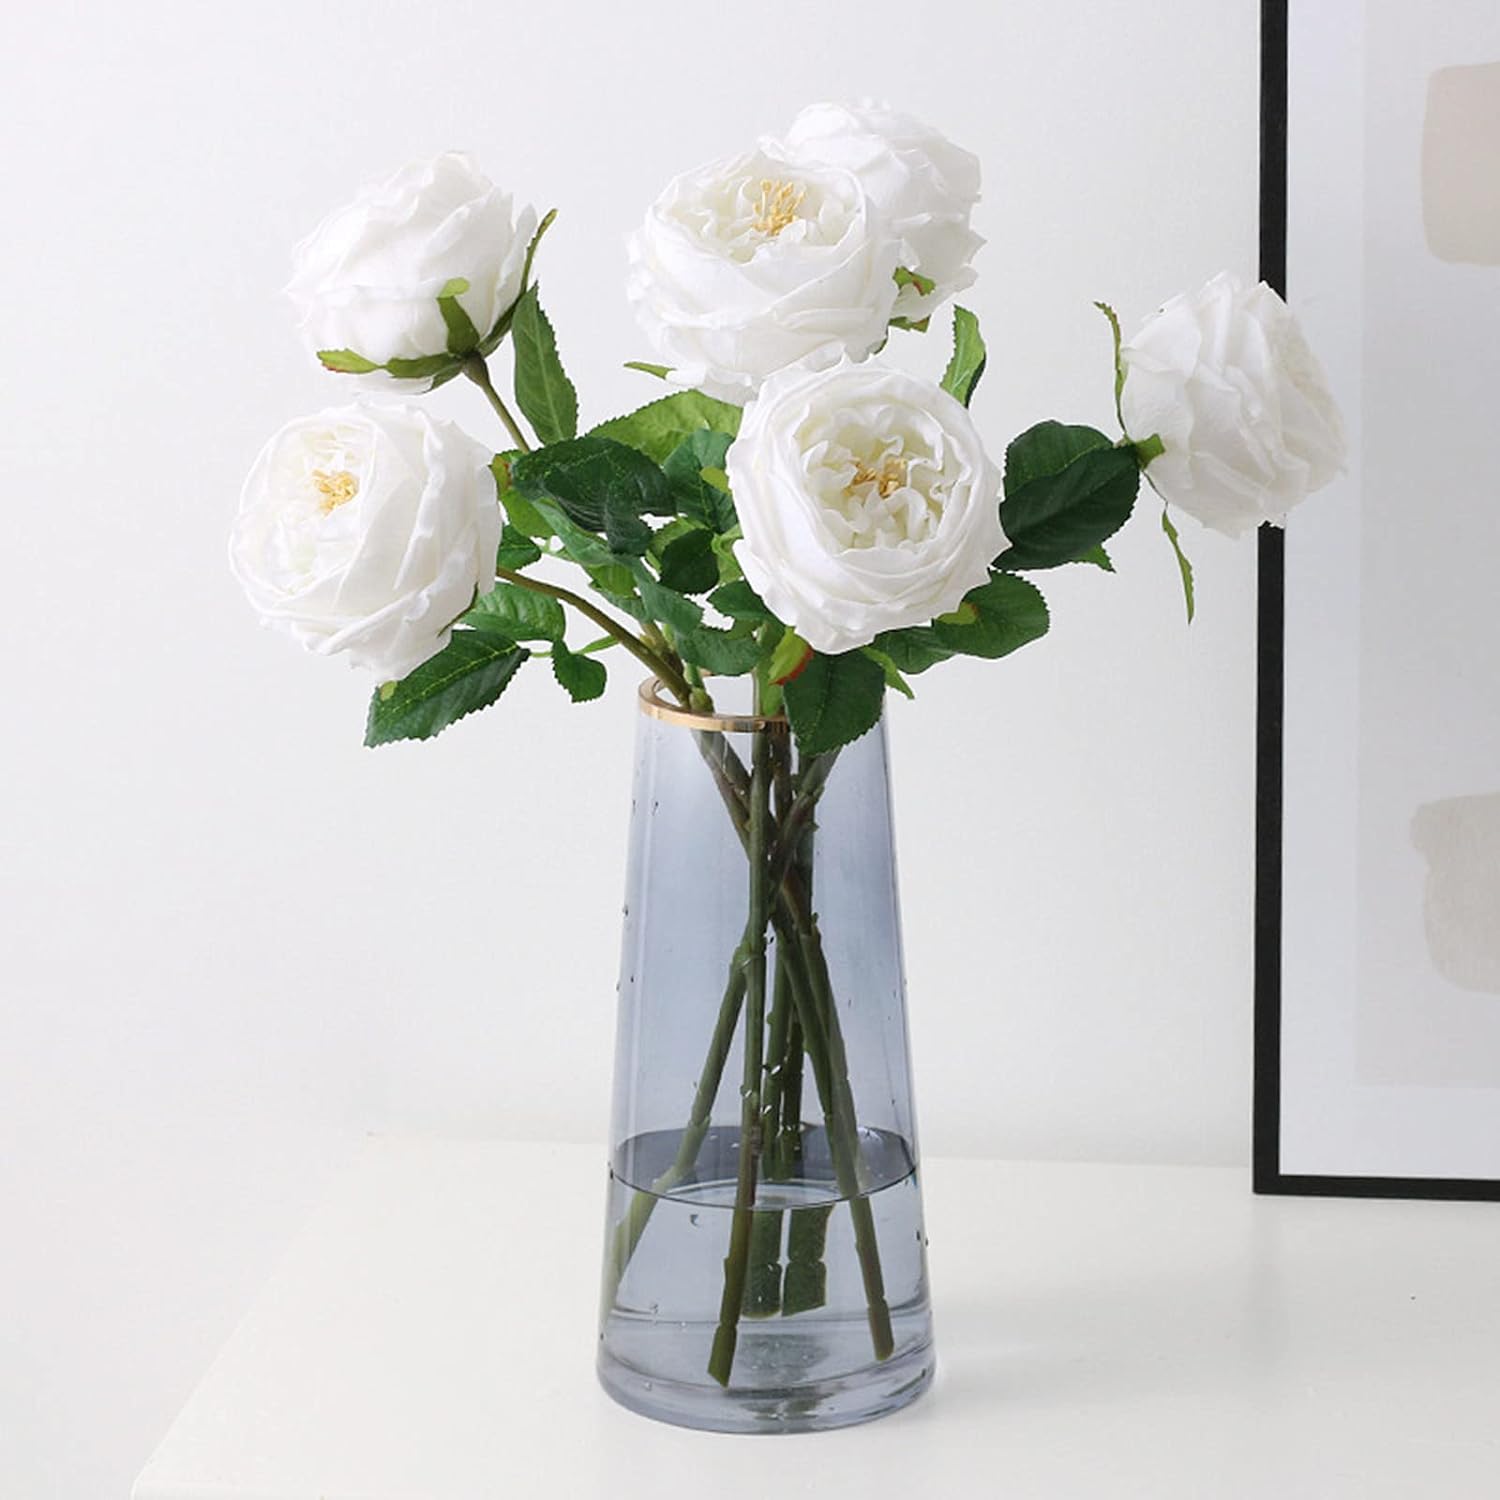 UKELER White Artificial Roses 4 Pcs Real Touch Latex Artificial Flowers Austin Rose Peony with Long Stem for Wedding Bouquet Home Decor Flower Arrangement Valentine' Day Gift